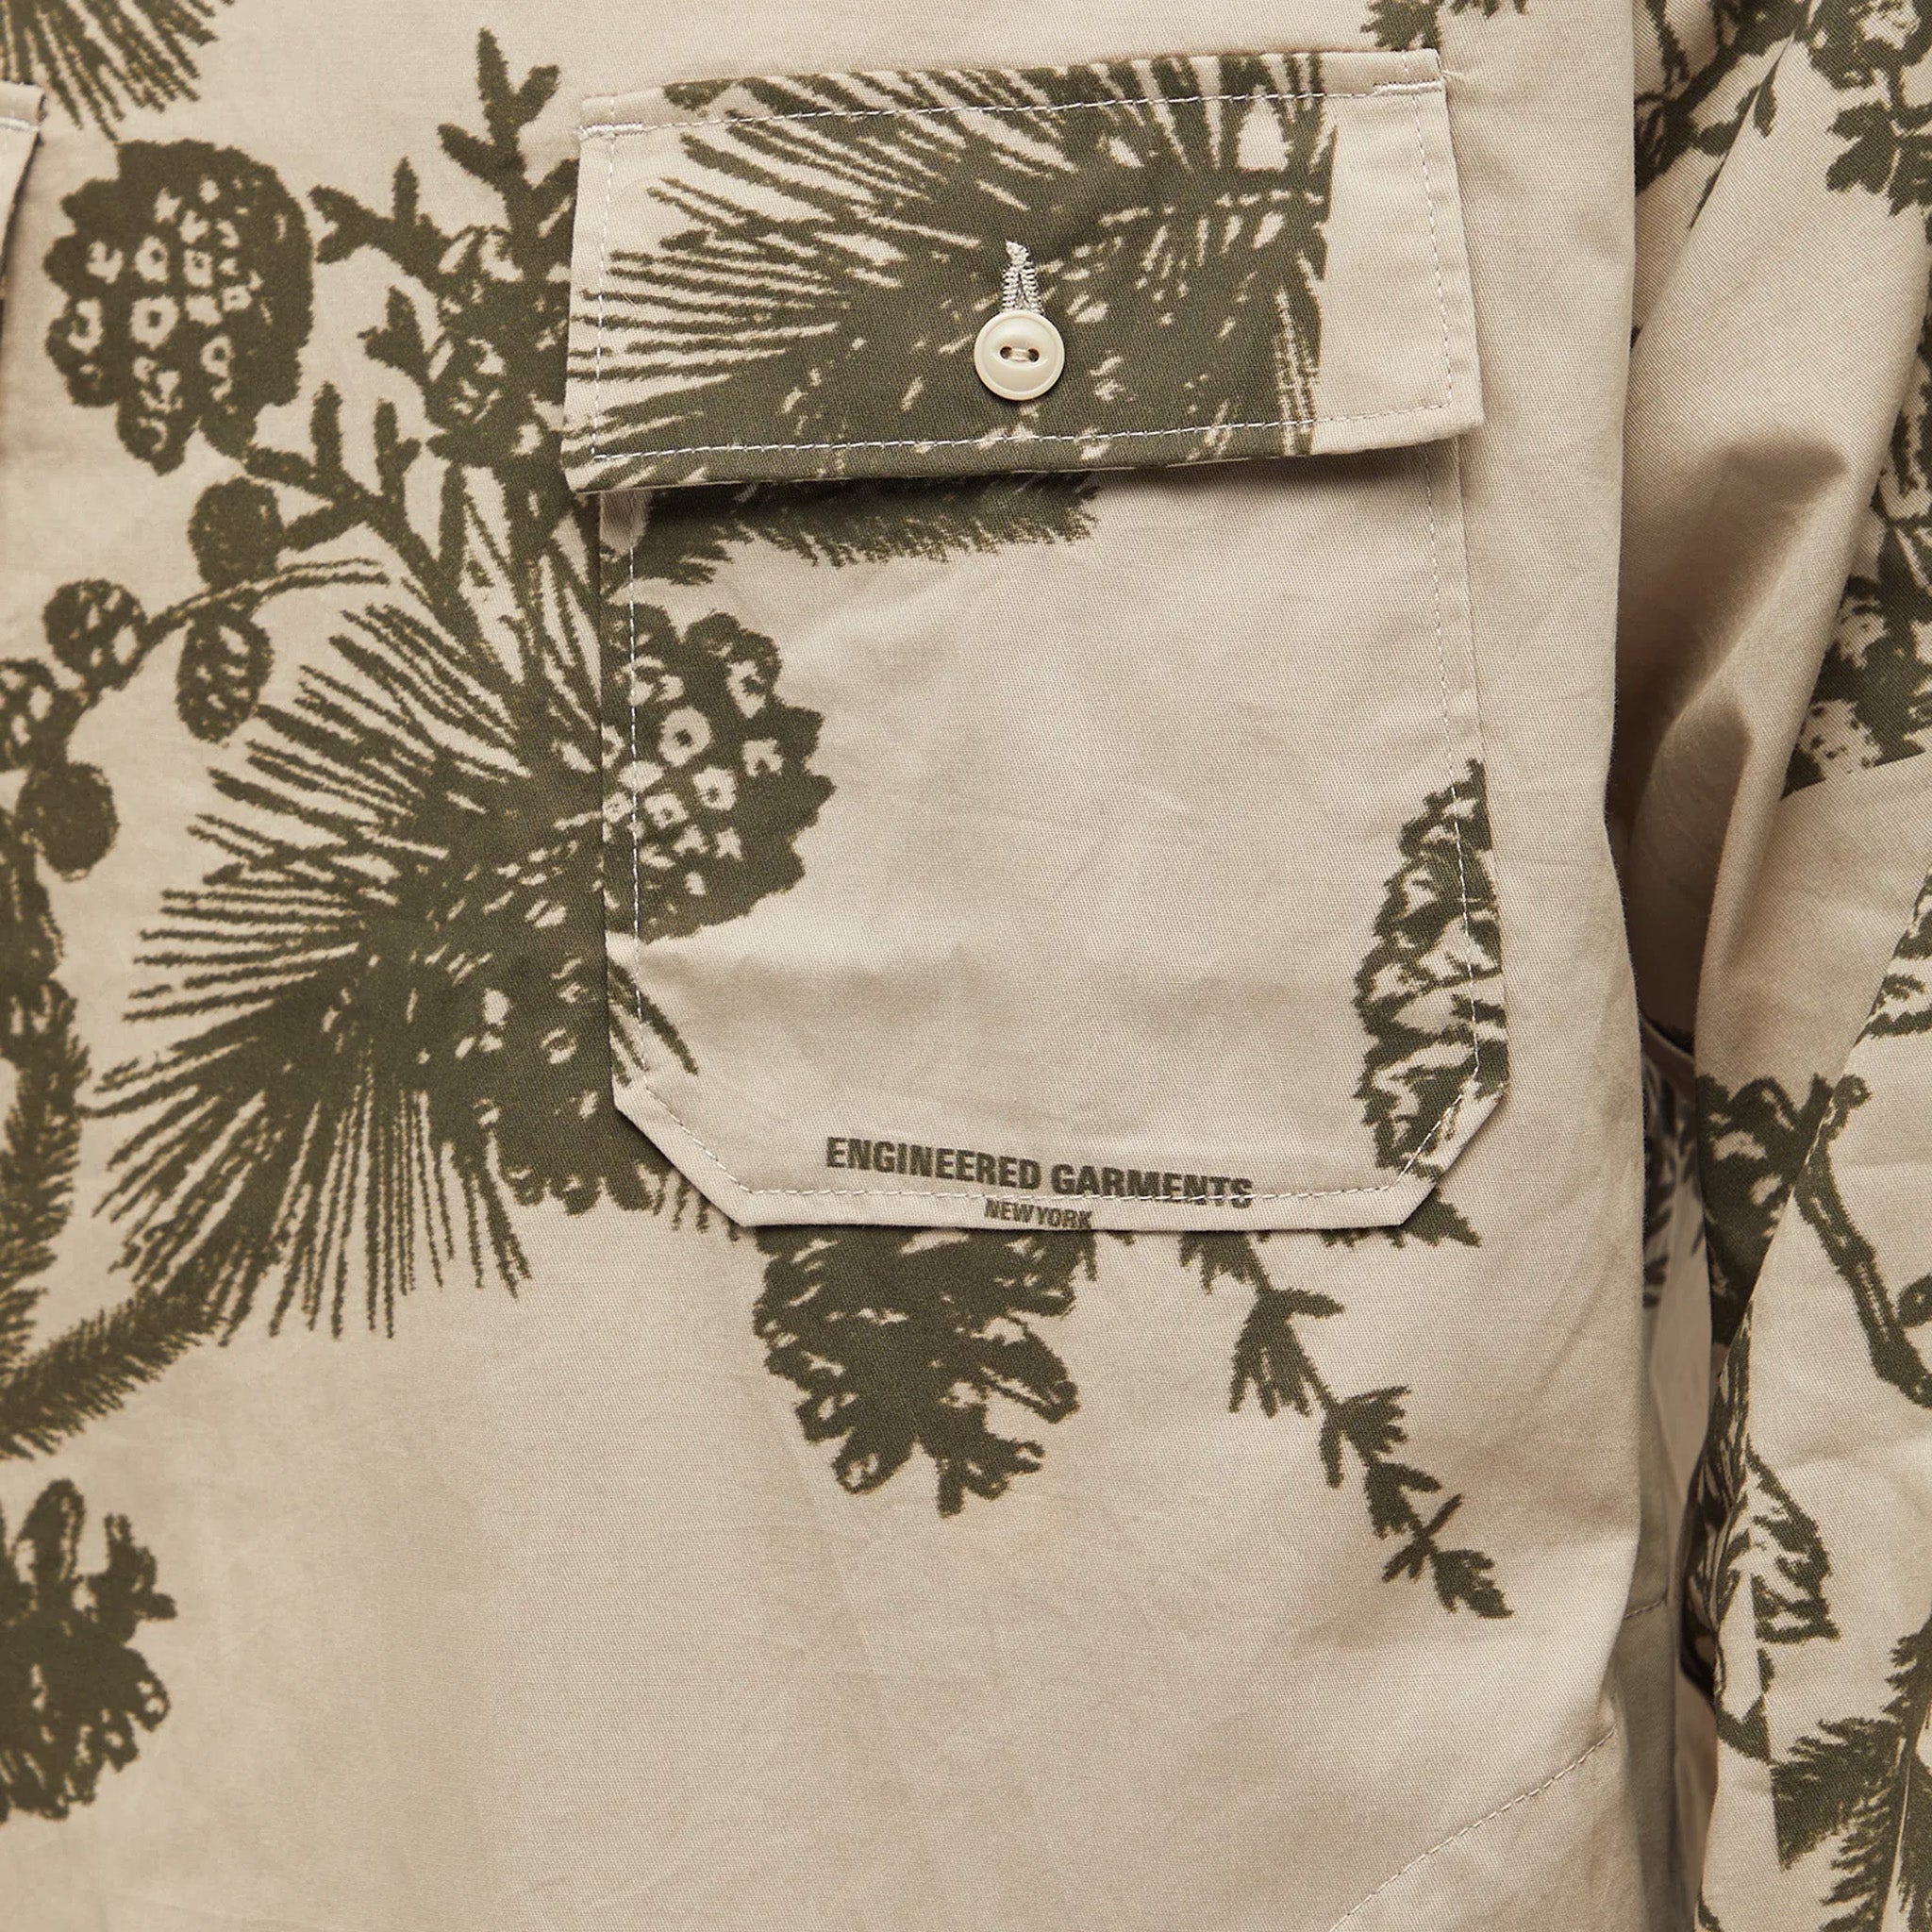 Engineered Garments Cagoule Shirt French Twill Pinecone Printed (Khaki) - August Shop